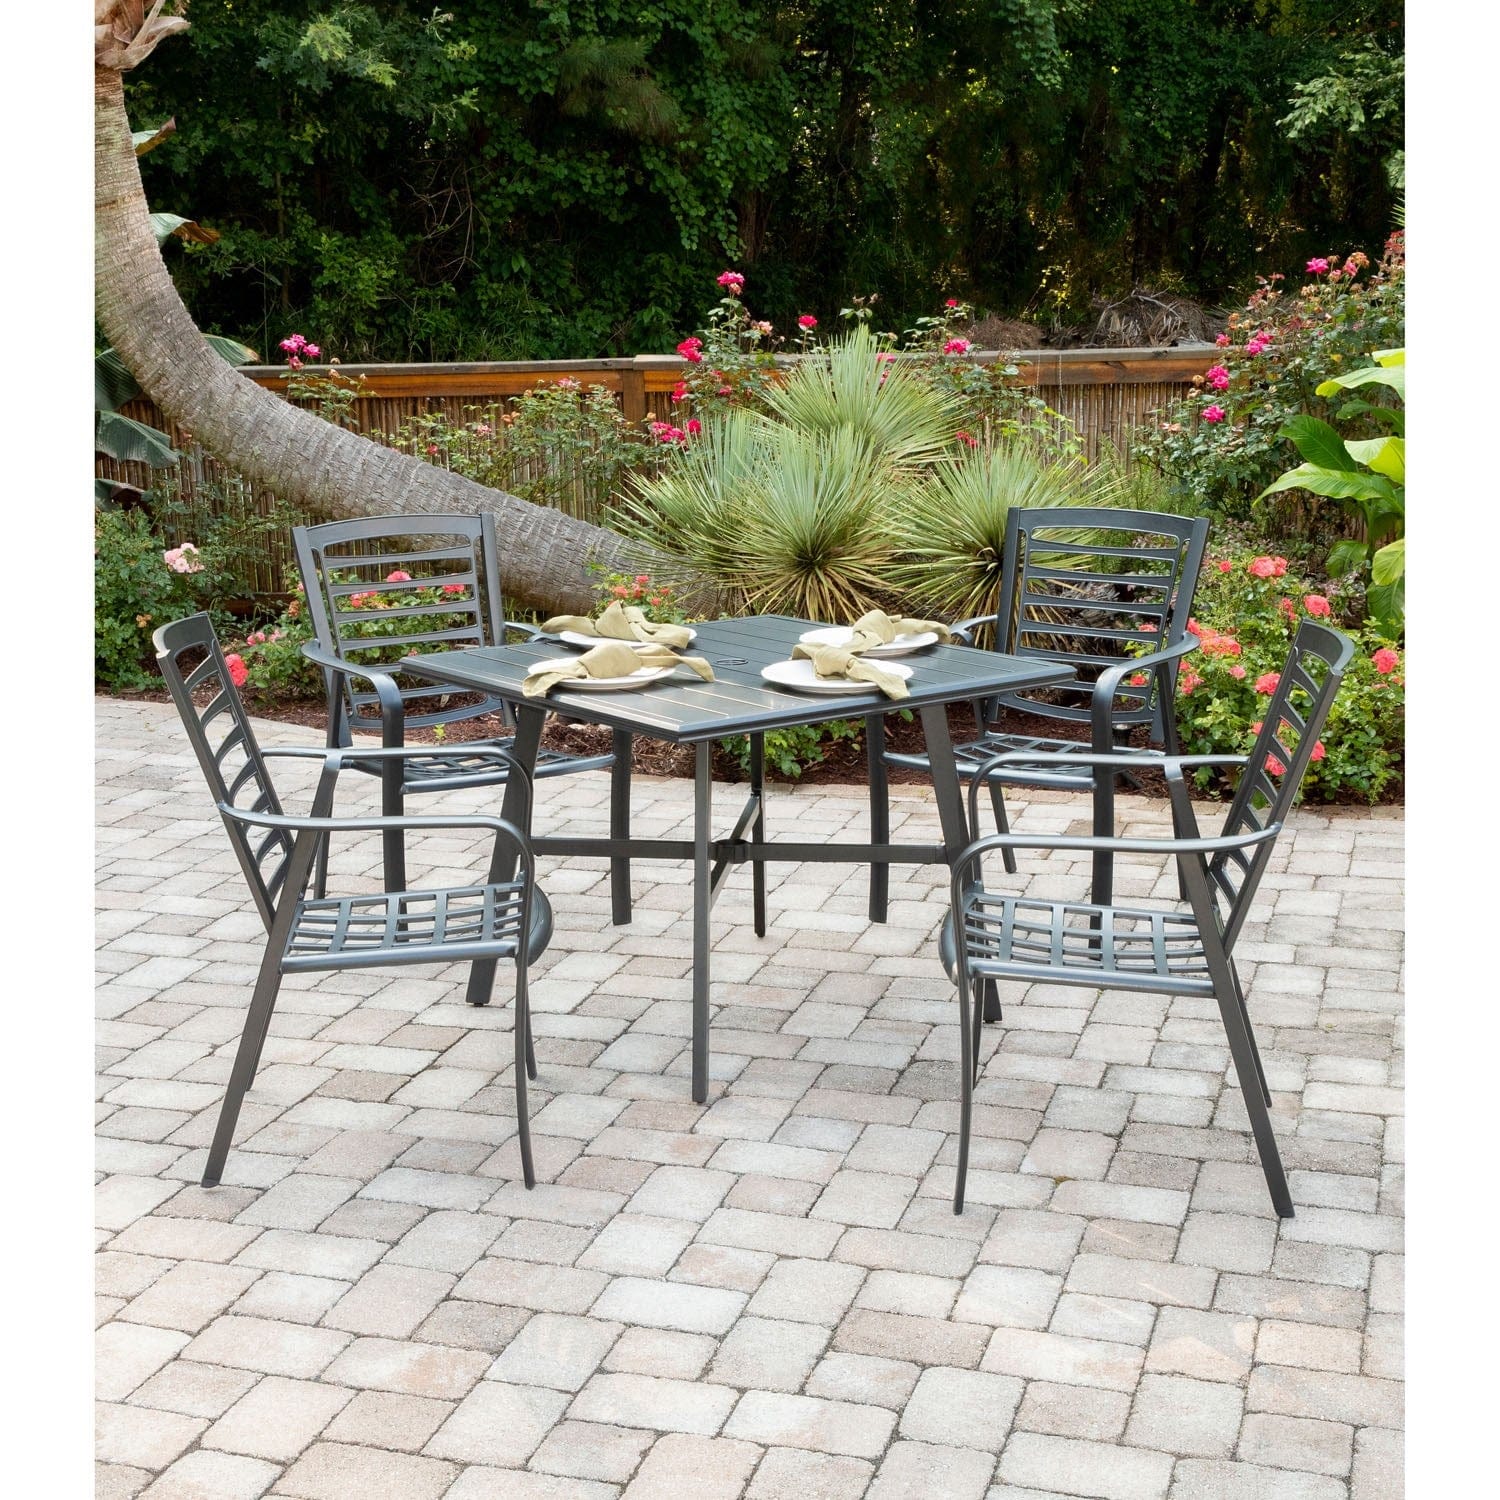 Hanover Outdoor Dining Set Hanover - Pemberton 5pc: 4 Alum Dining Chairs  and 1 38" Sq Slat Table